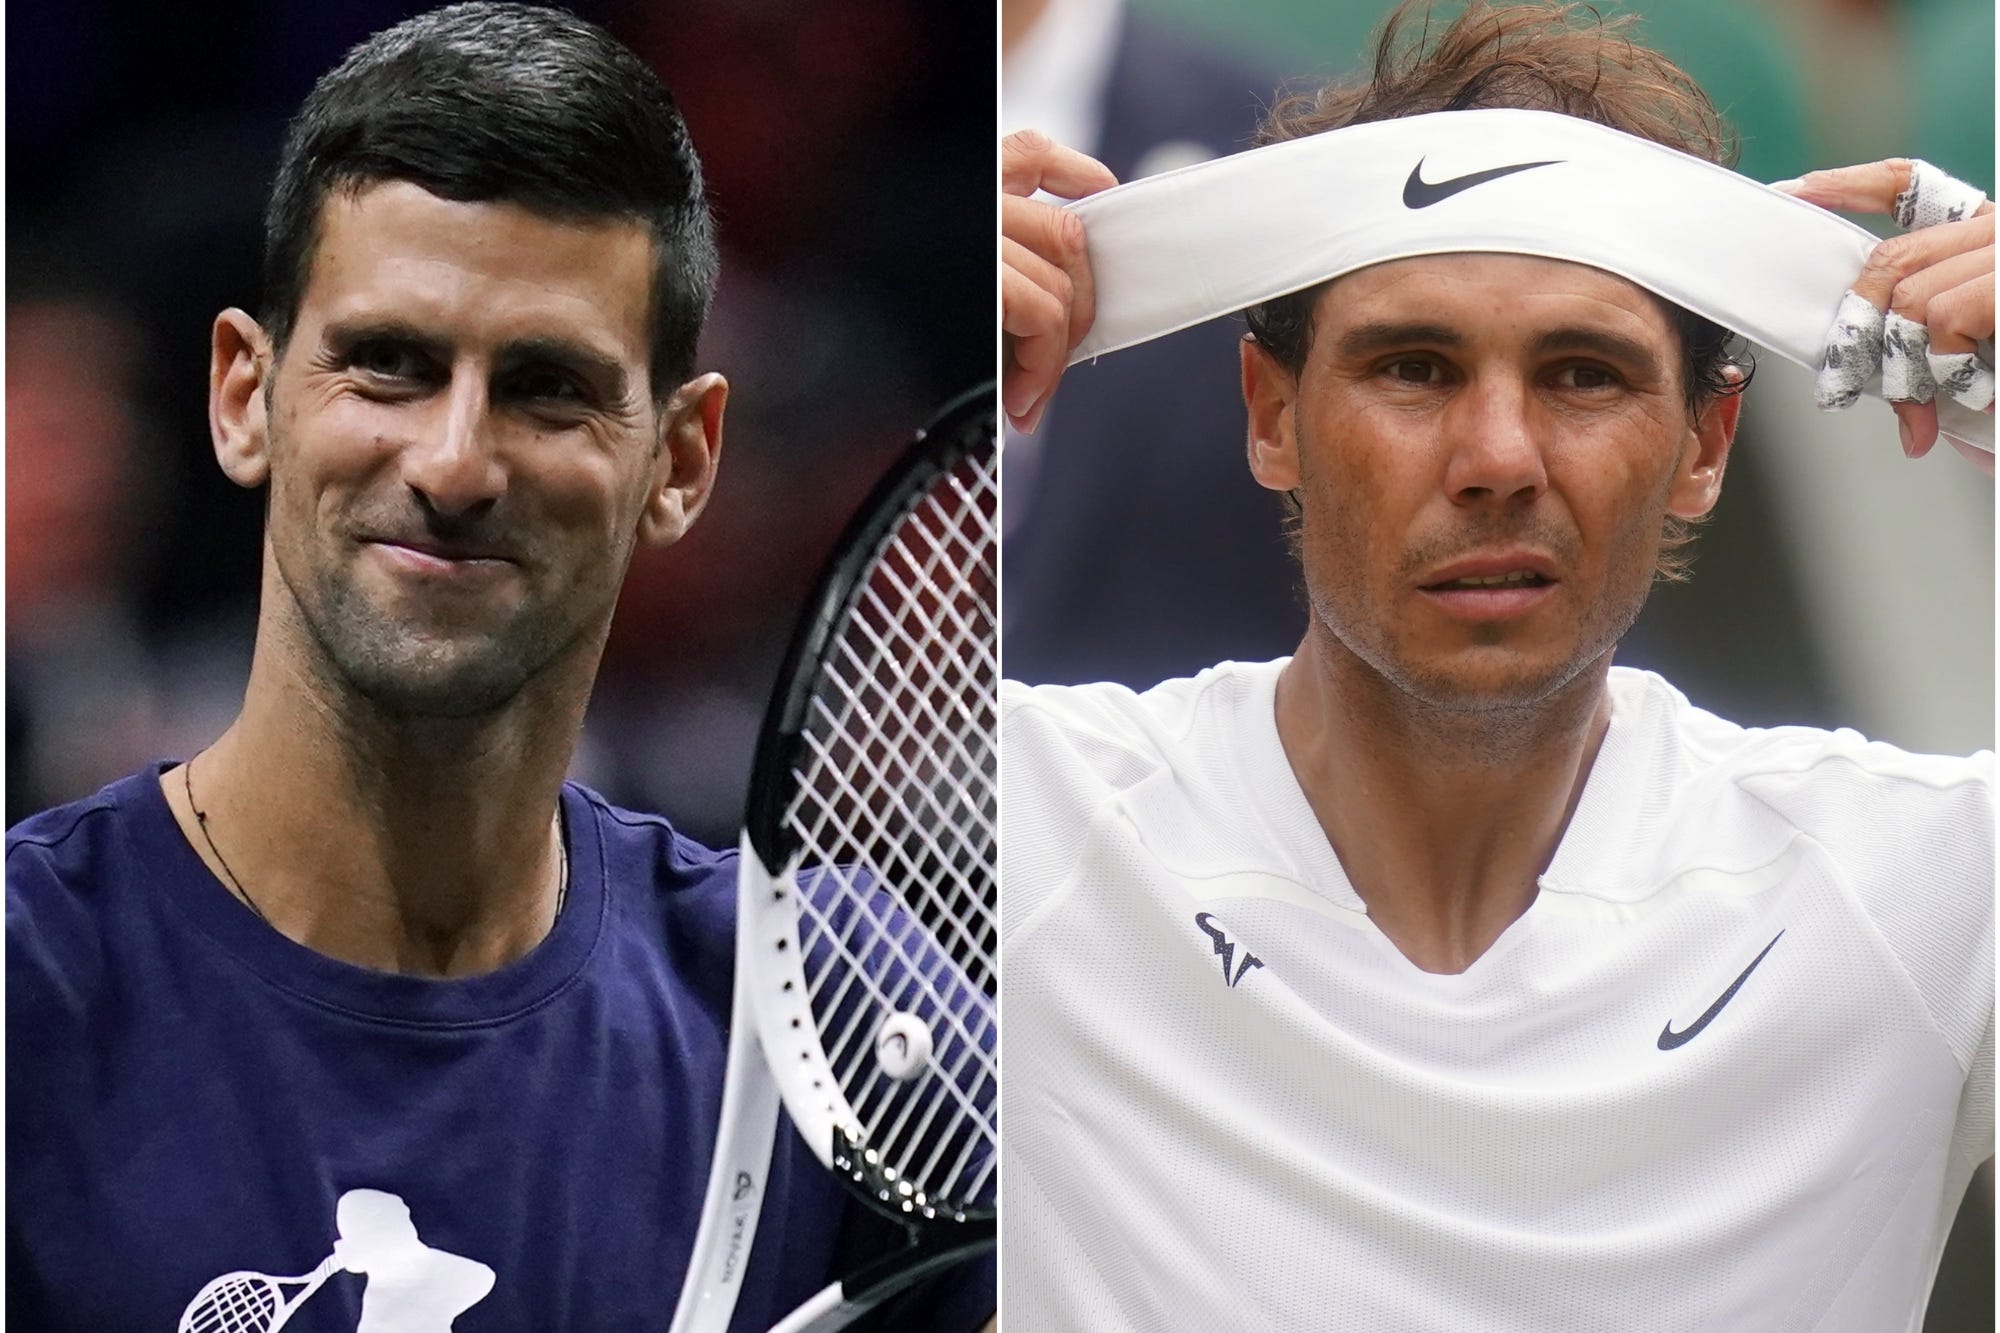 Novak Djokovic and Rafael Nadal backed for French Open battle locked on 22 grand slams each The Independent